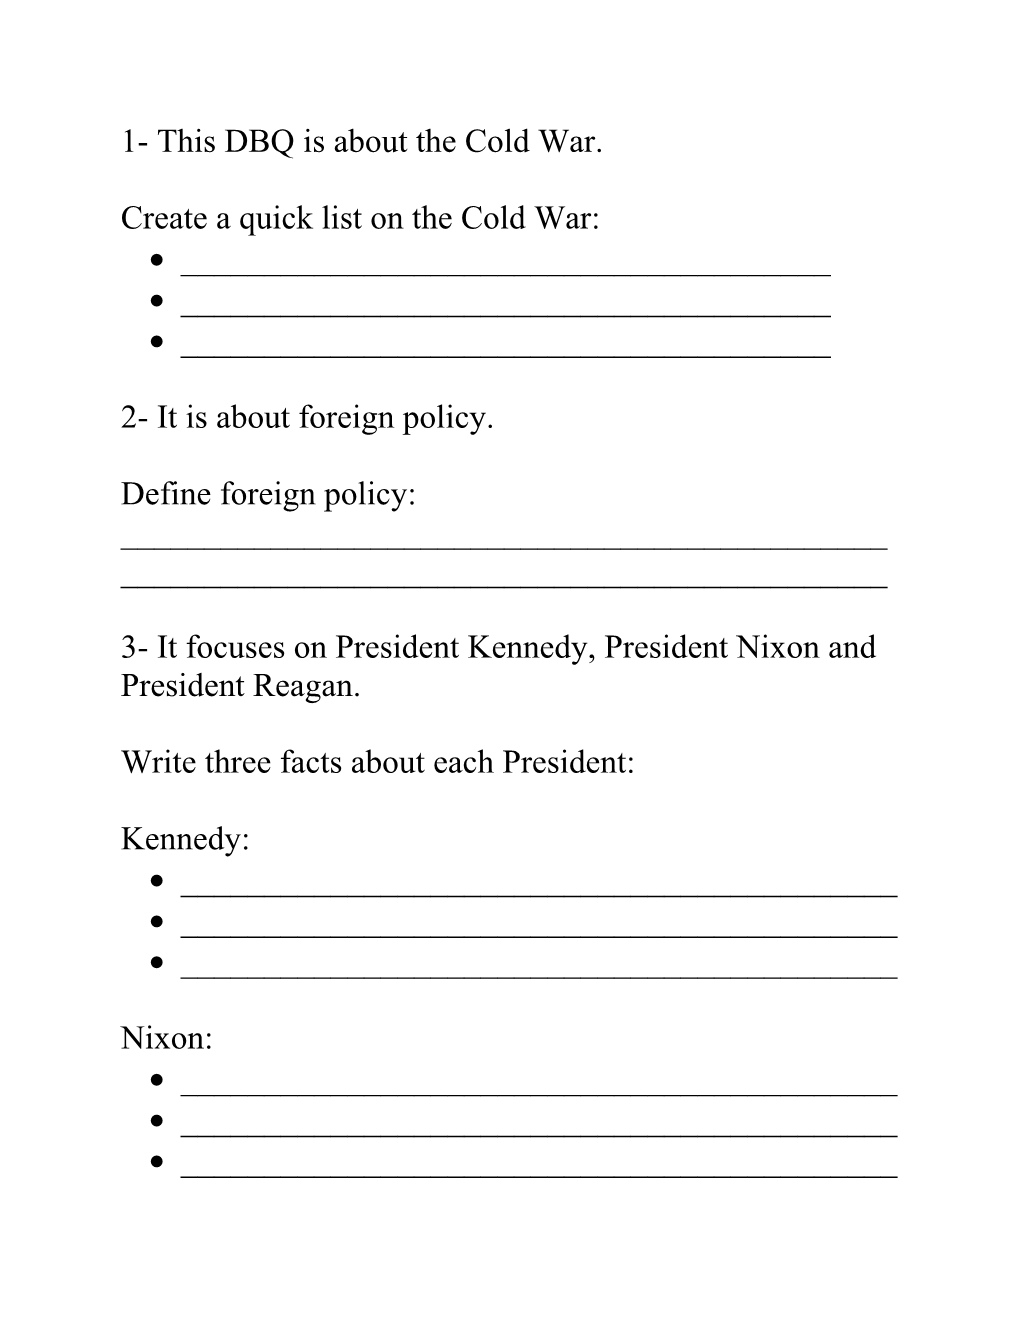 1- This DBQ Is About the Cold War